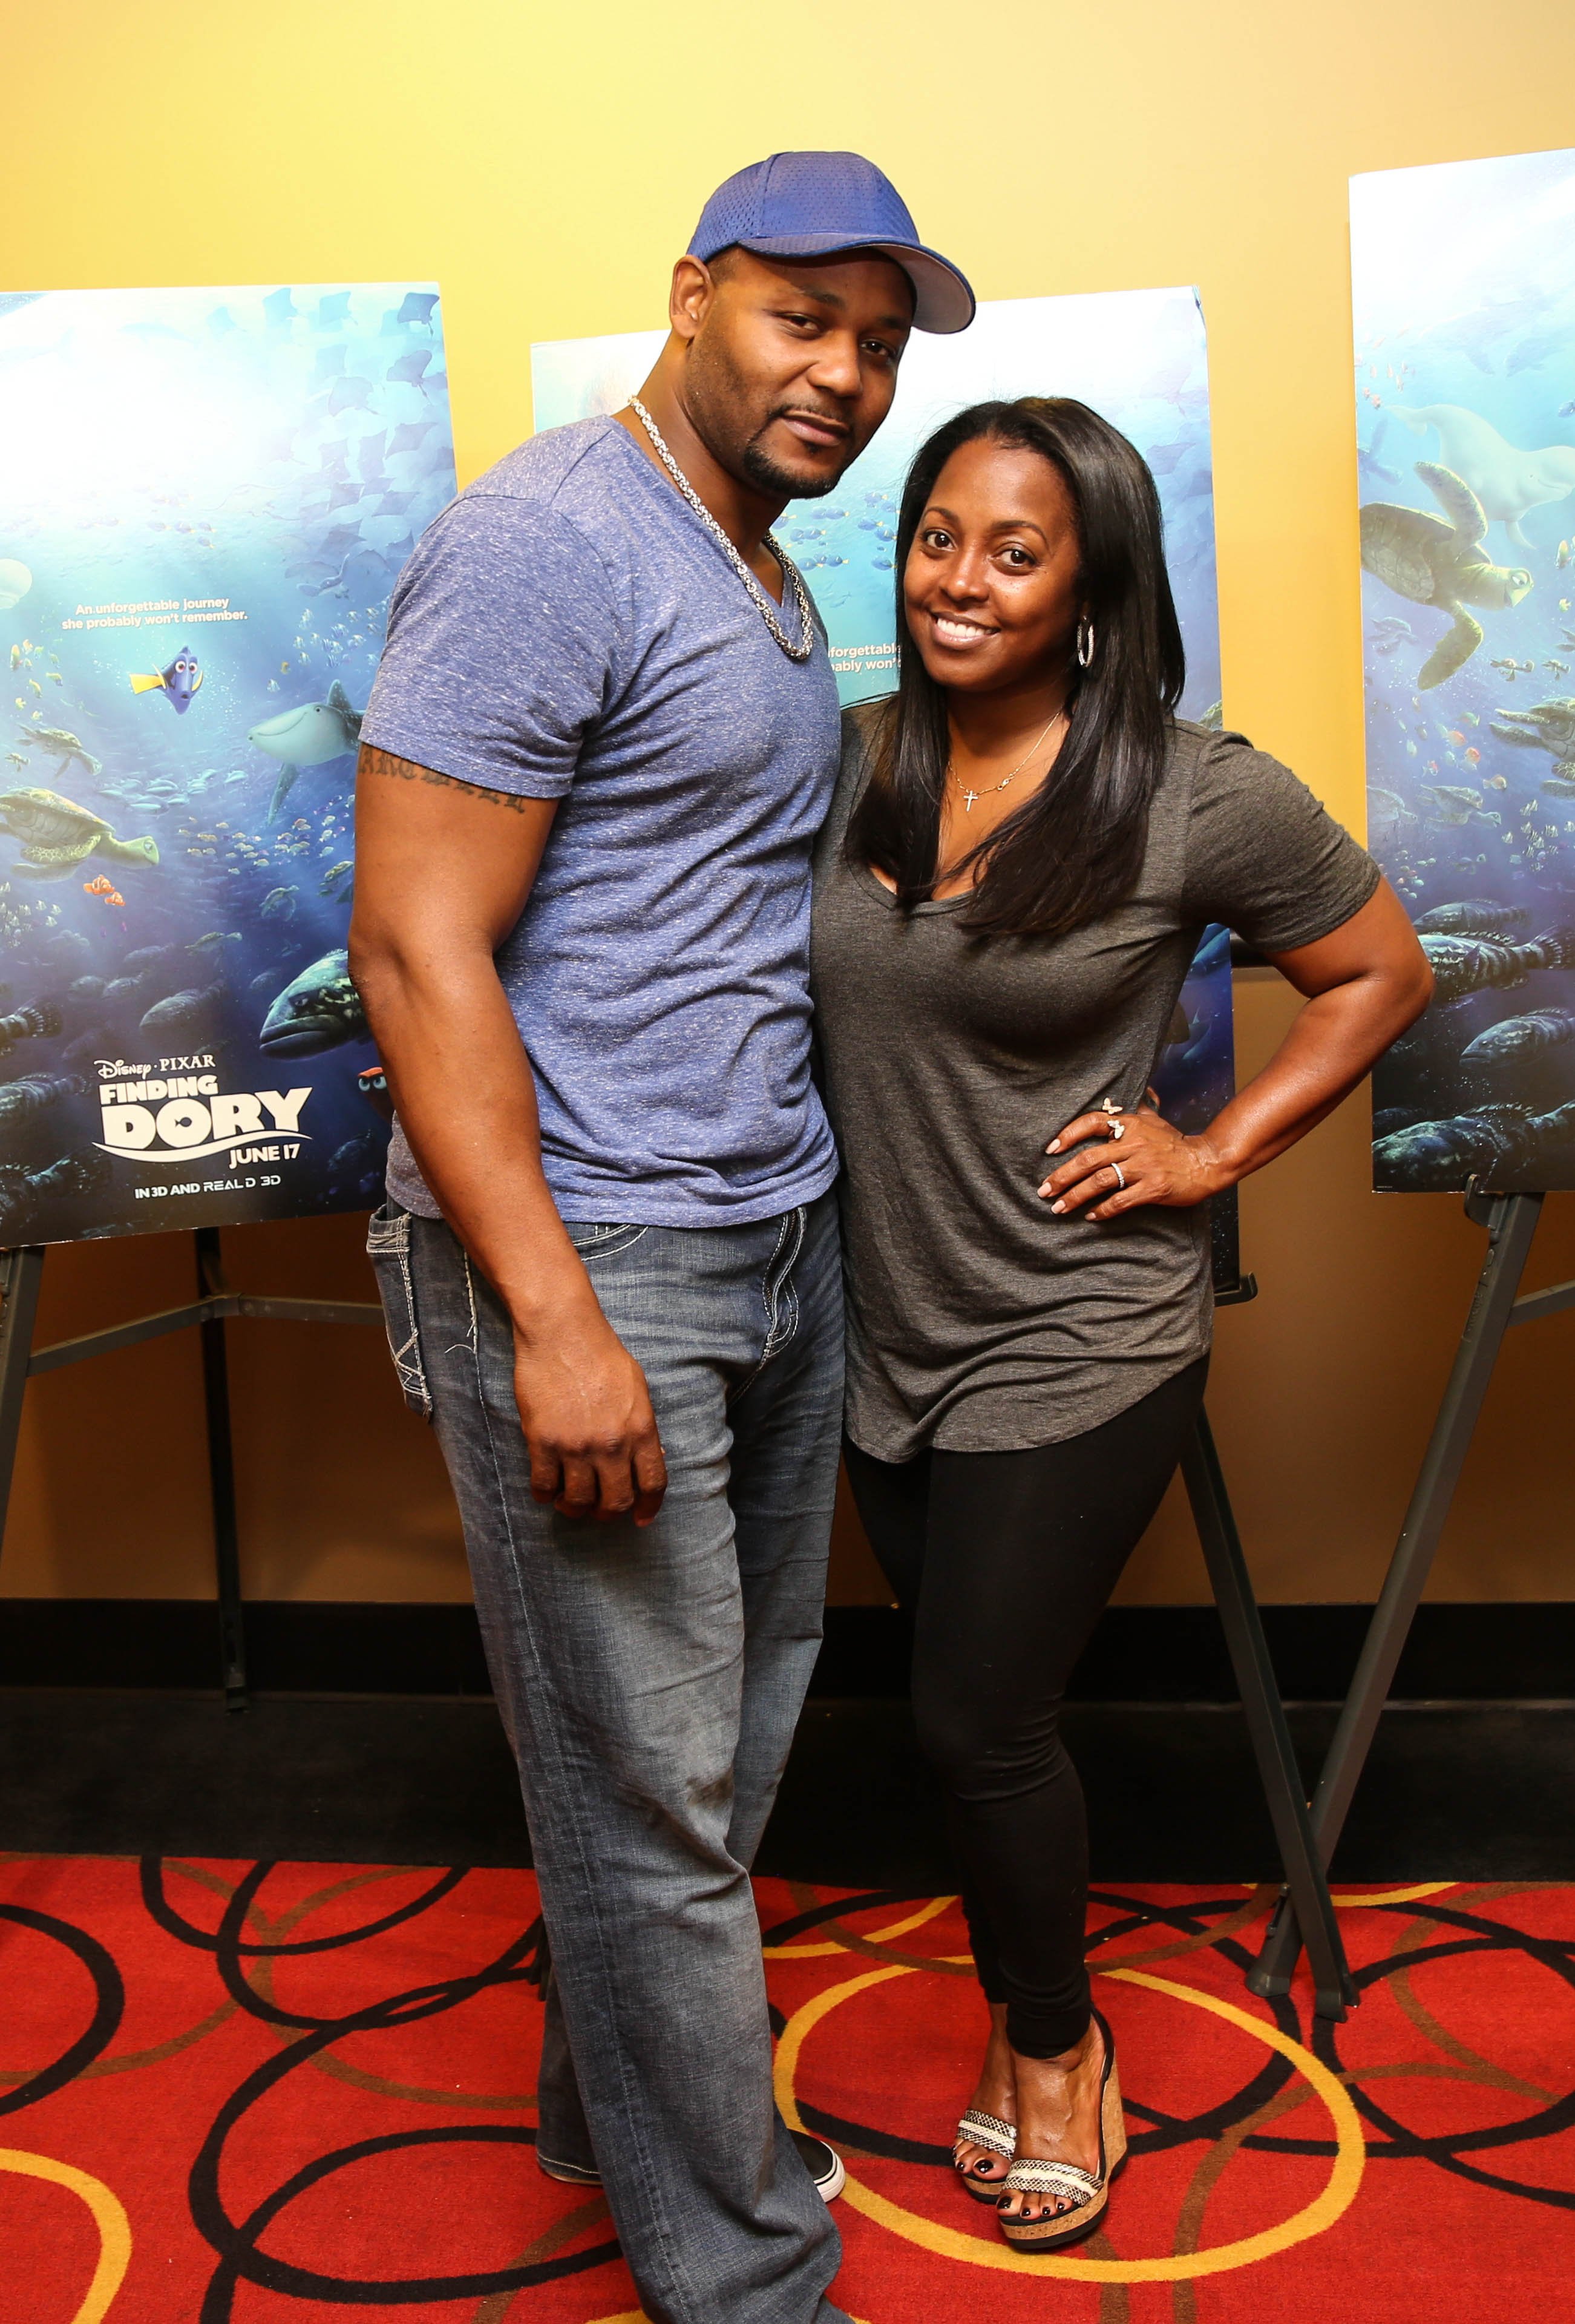 Keshia Knight Pulliam and Ed Hartwell at an advanced screening of "Finding Dory" in 2016. | Photo: Getty Images